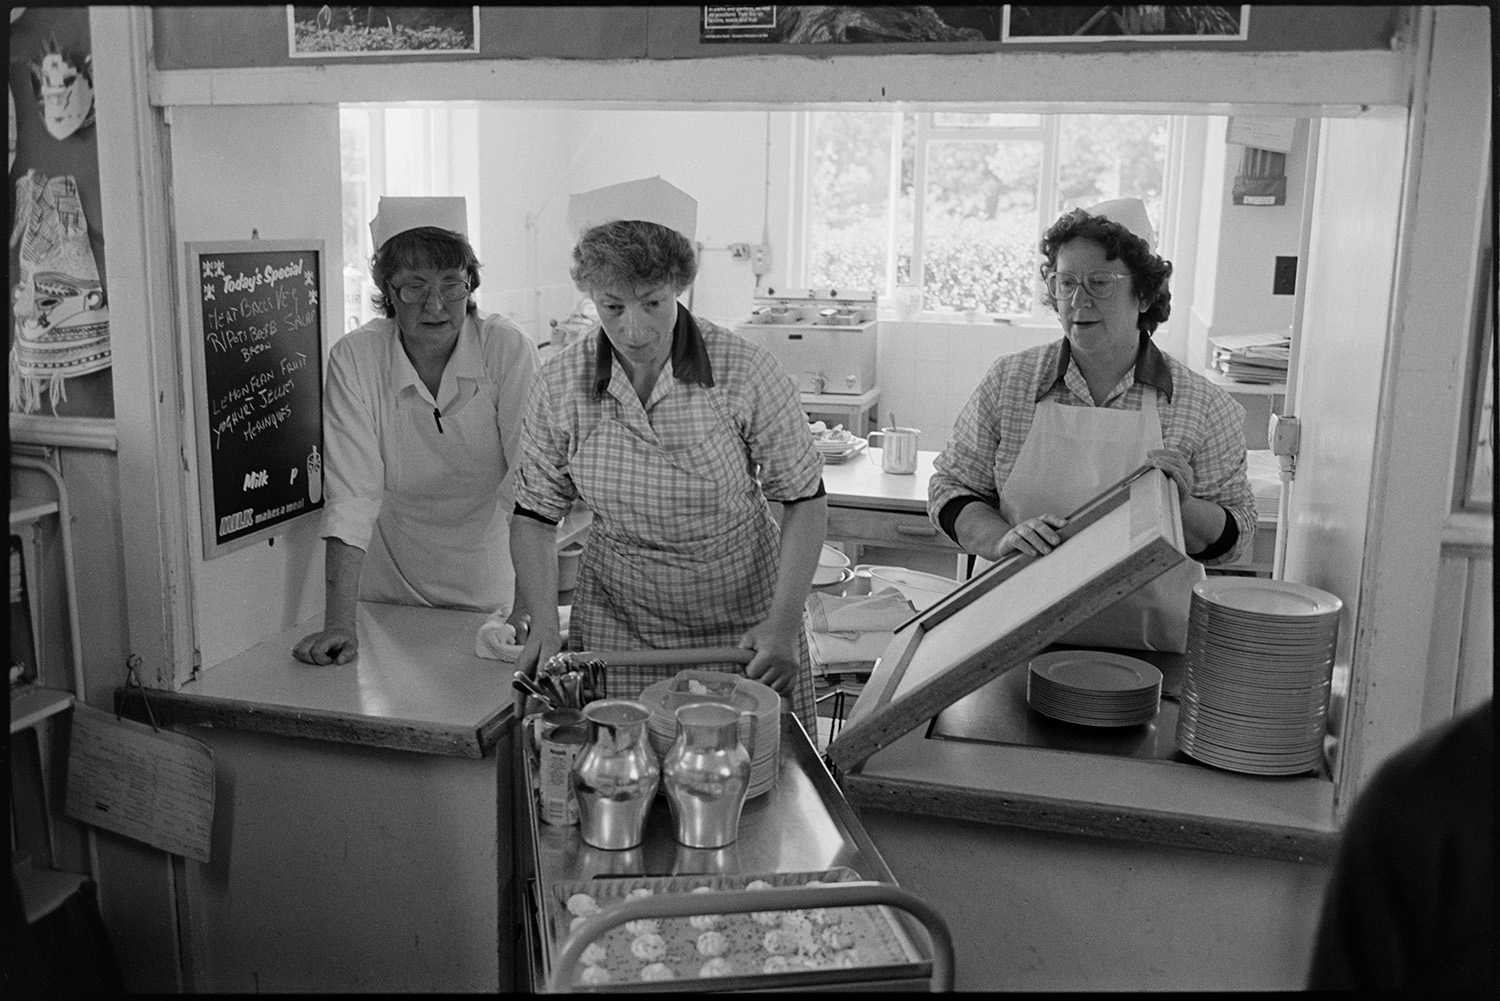 Primary school day. Teachers and pupils. Catering women making and serving lunch. Line up in yard.
[Three dinner ladies working in the canteen at Chulmleigh Primary School. One of them is holding up the serving hatch to let another woman push through a trolley with plates of food and jugs.]